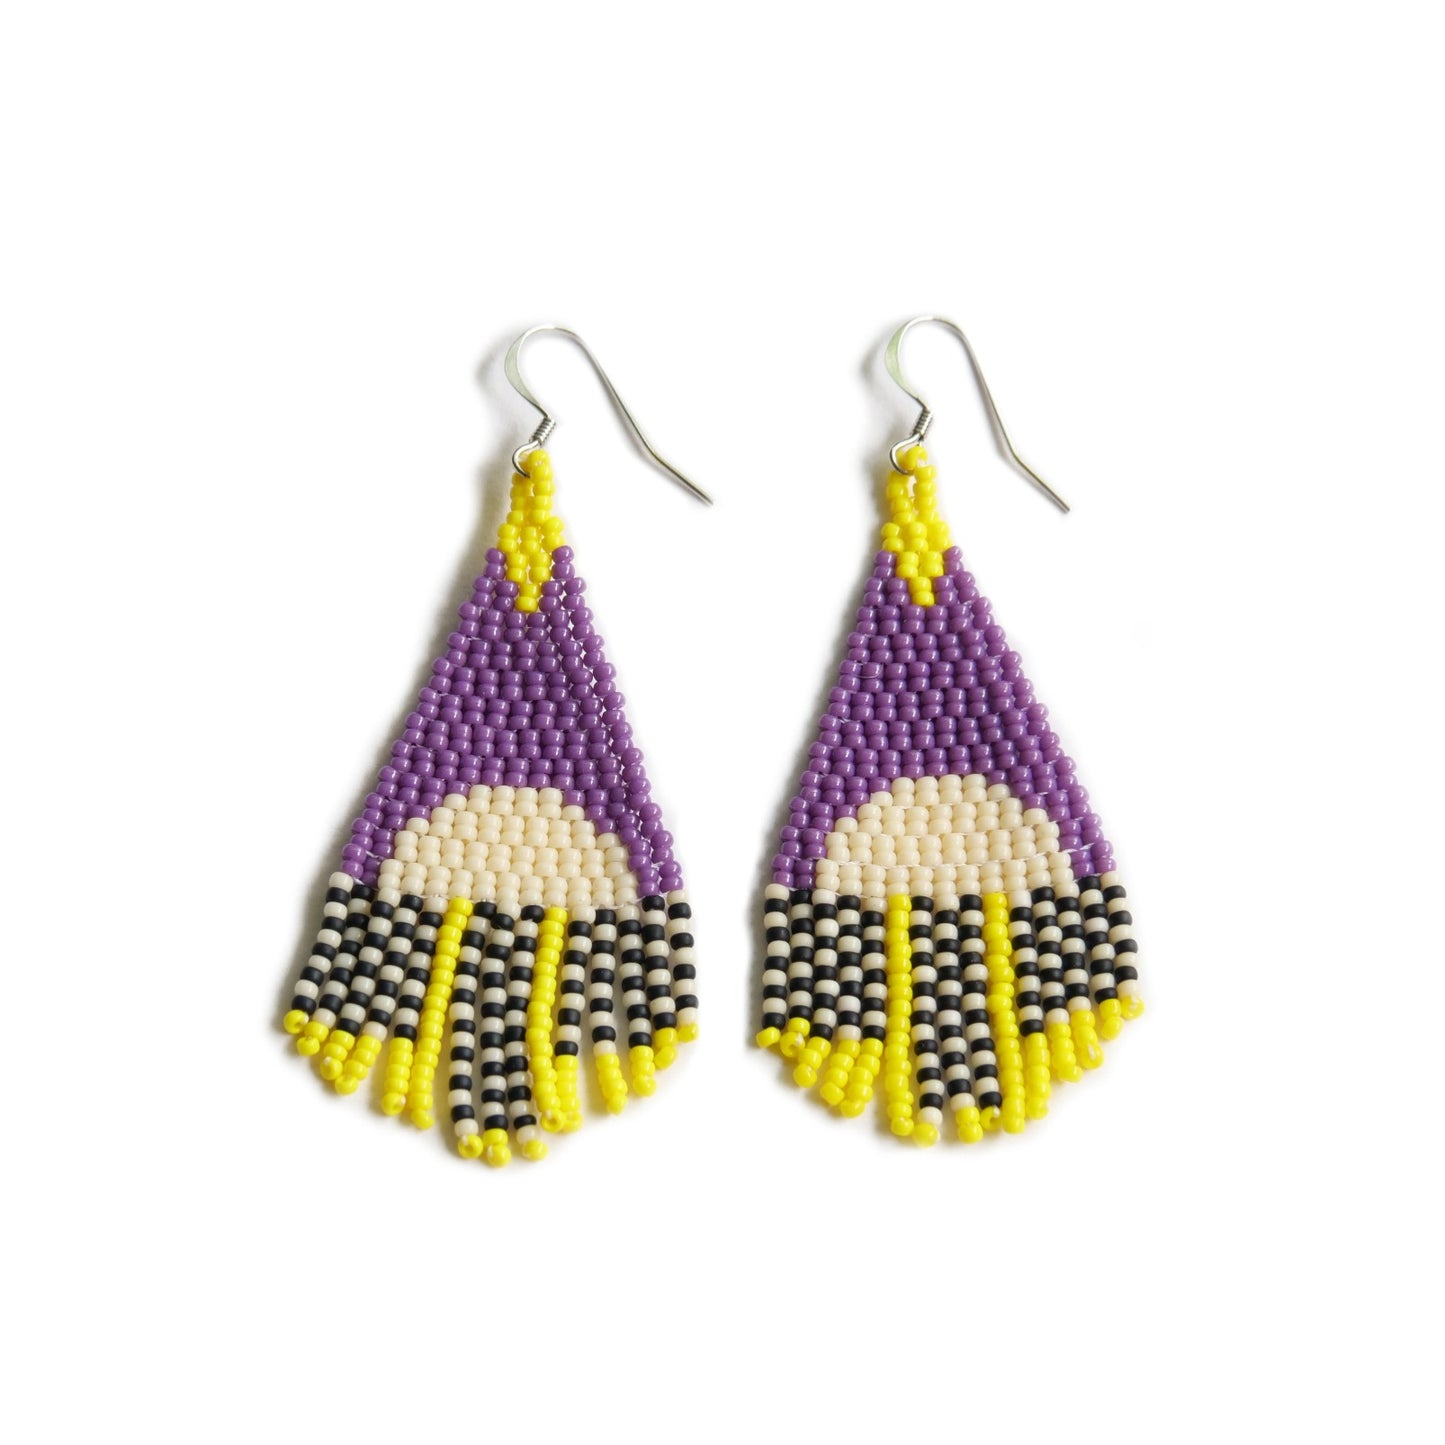 Purple, yellow, black and white beaded earrings handmade by Canadian indigenous artist Bead n' Butter.